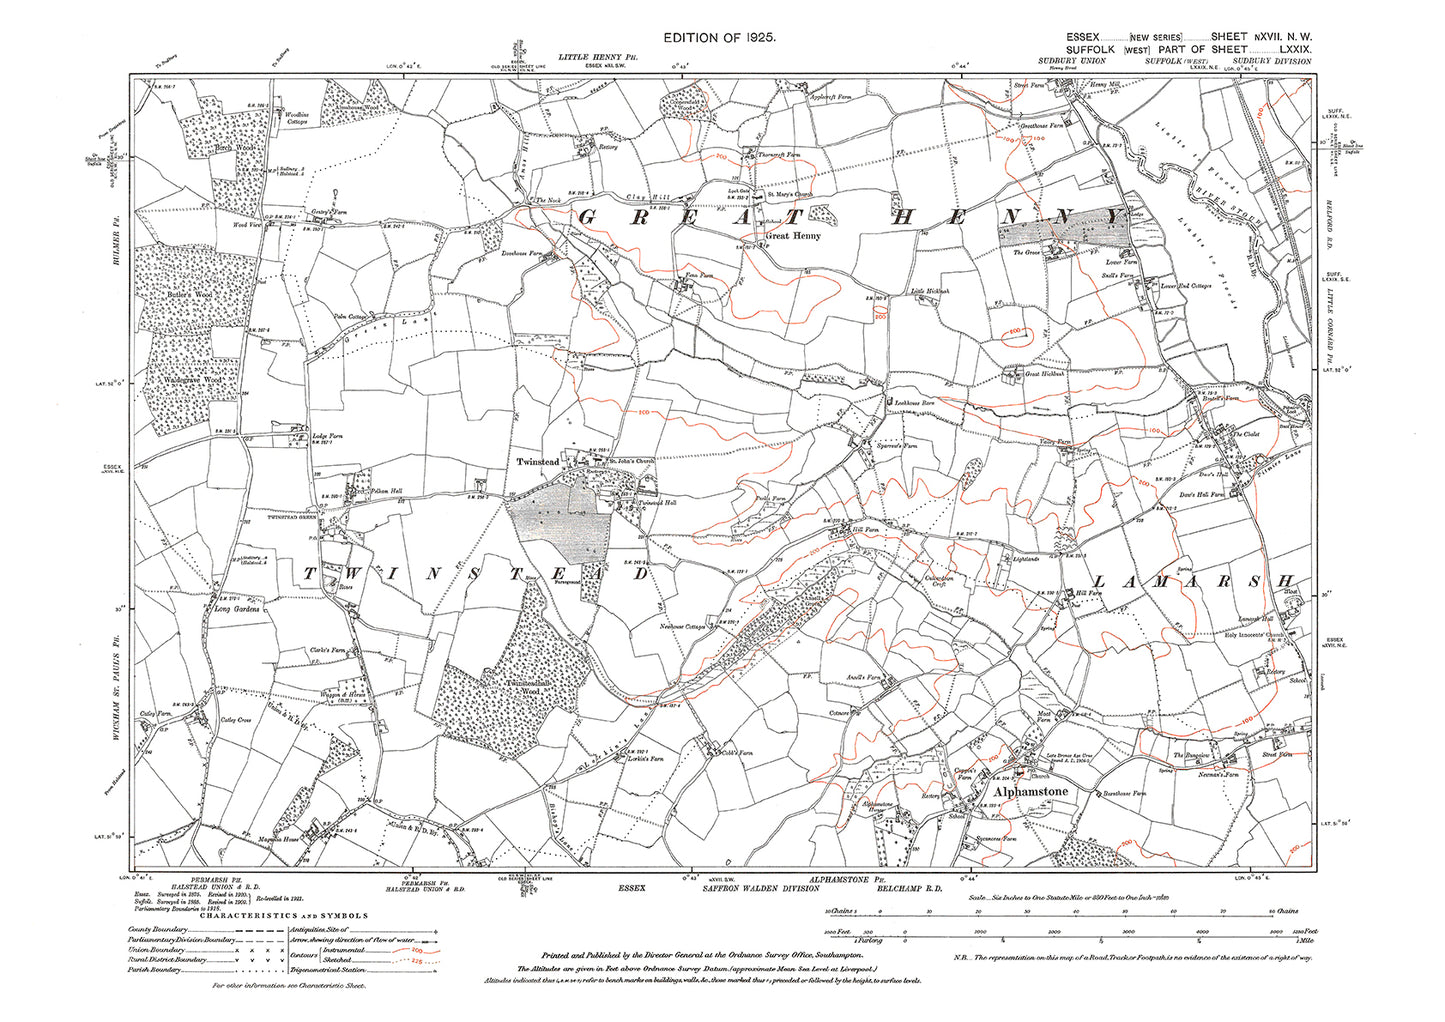 Old OS map dated 1925, showing Alphamstone, Great Henny and Twinstead in Essex - 17NW